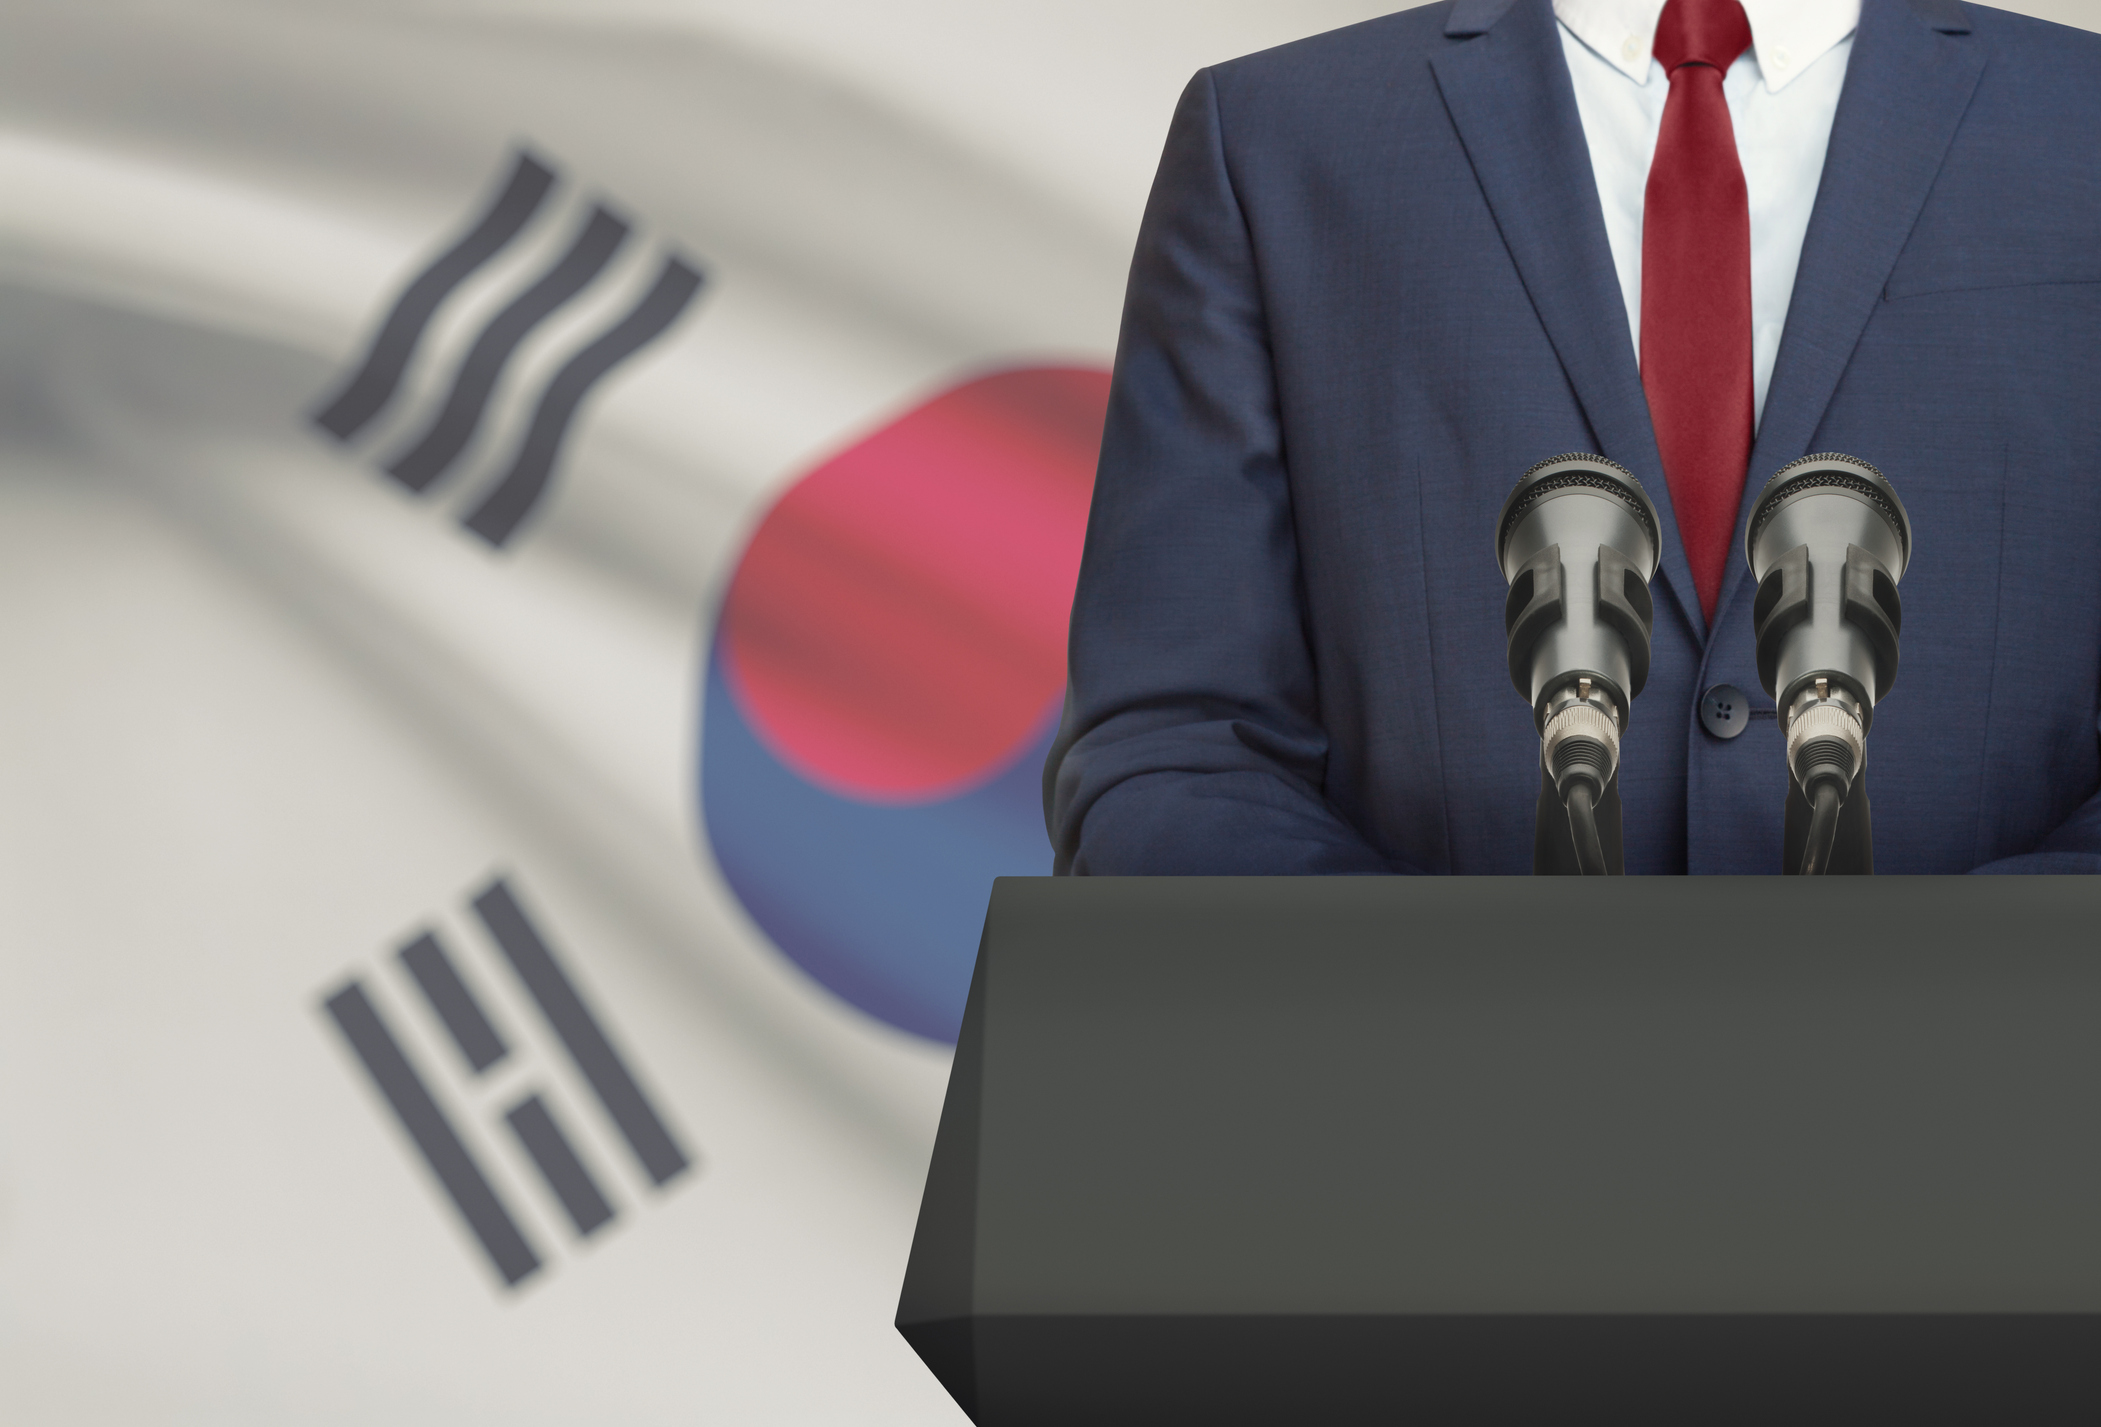 Peace and Security Hopes for New ROK Administration